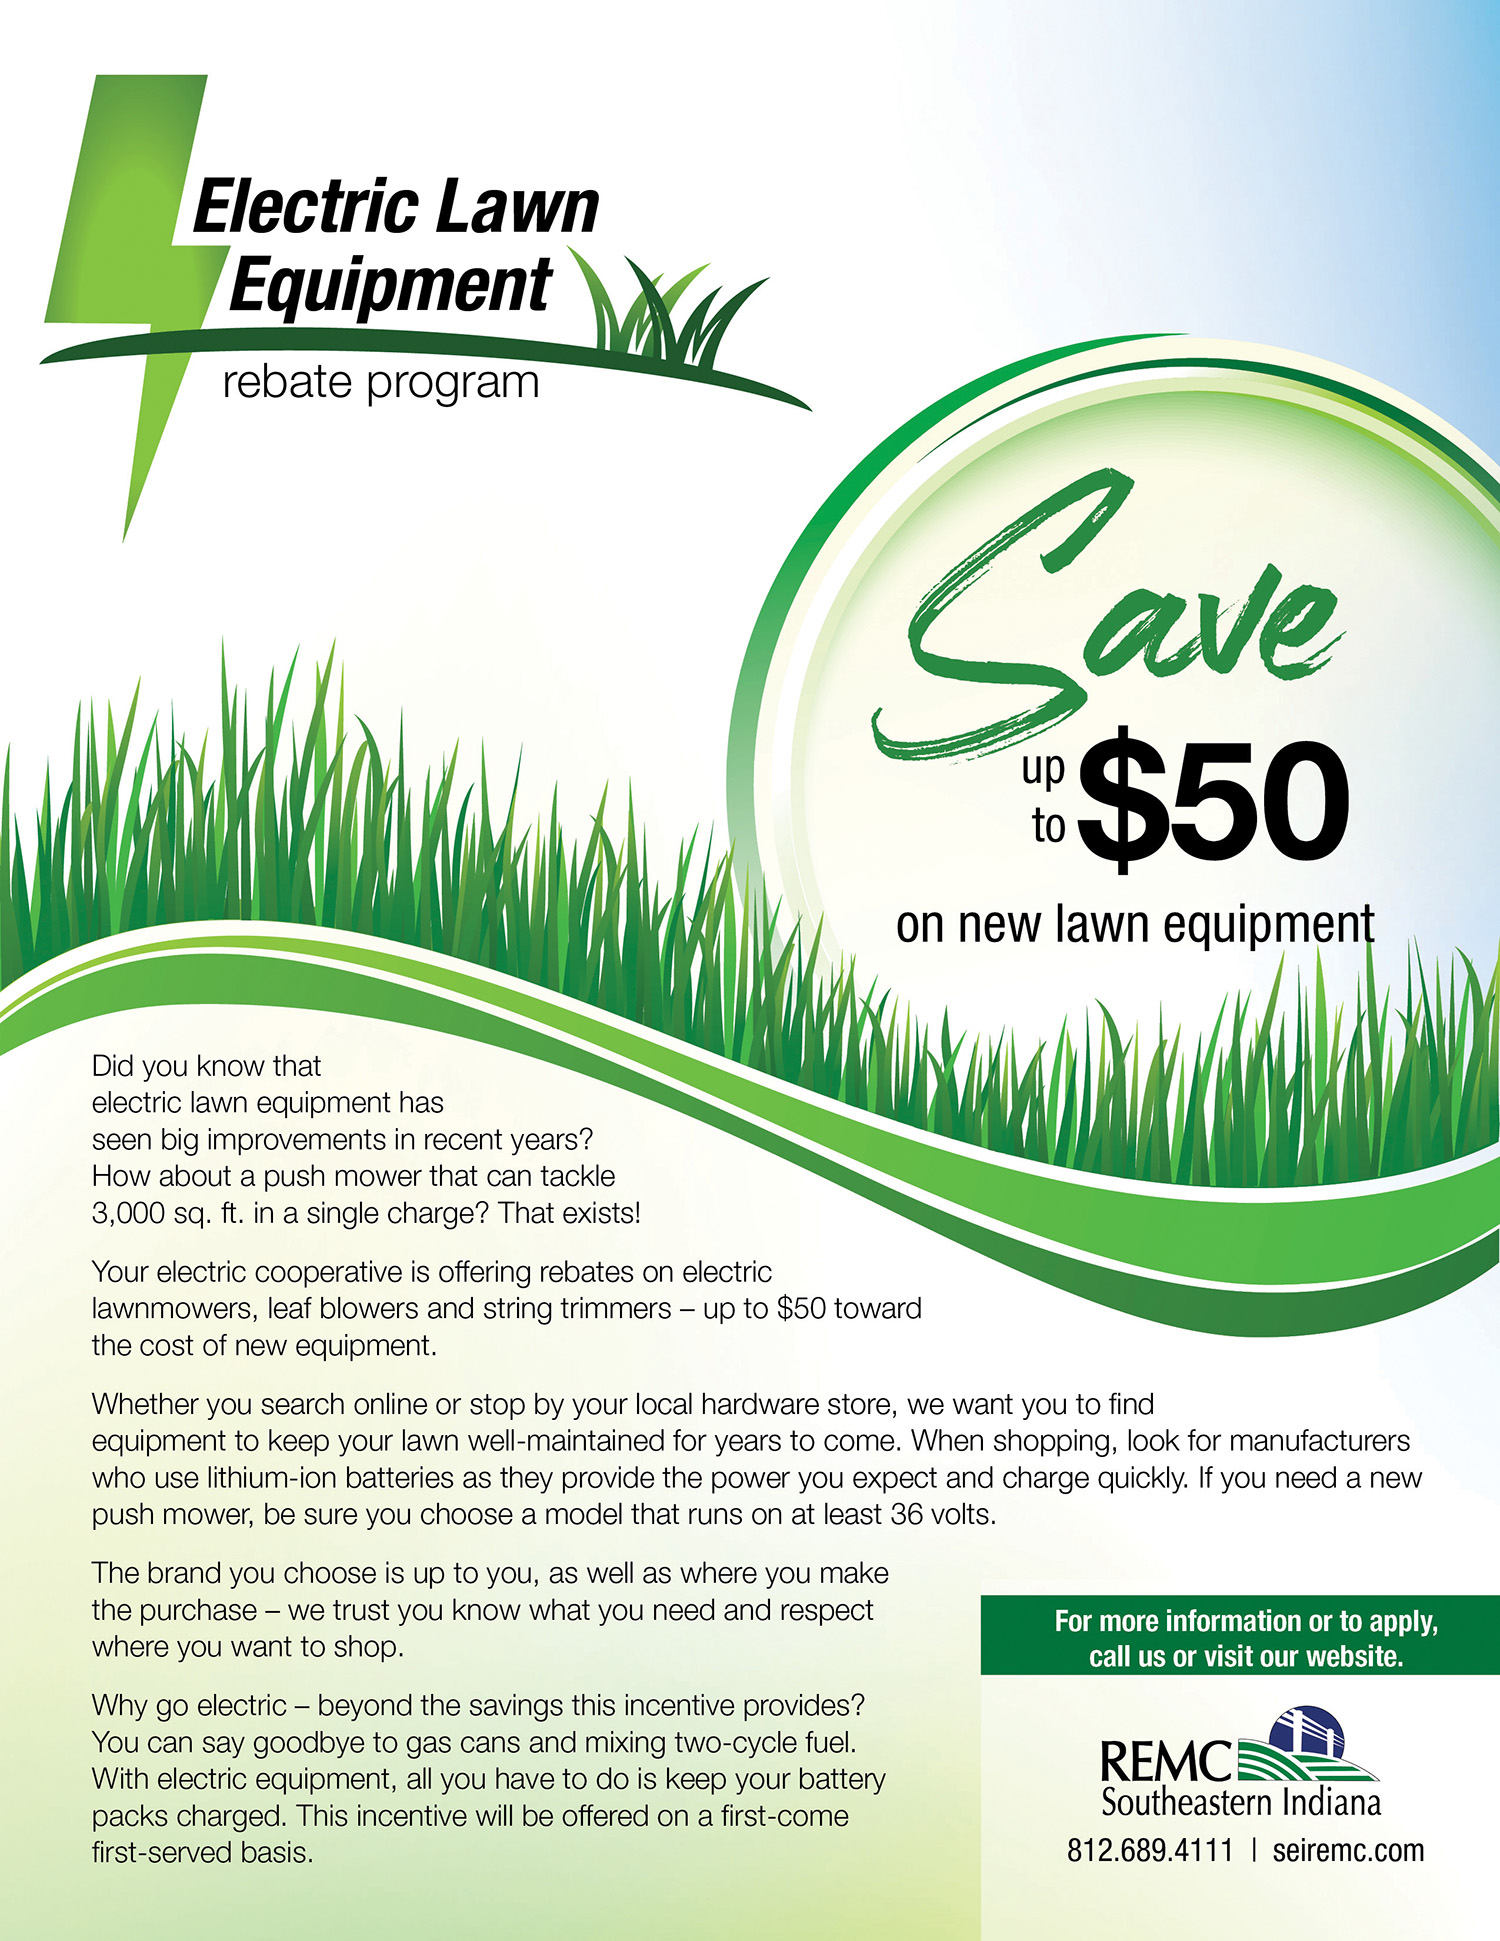 electric-lawn-equipment-rebate-program-indiana-connection